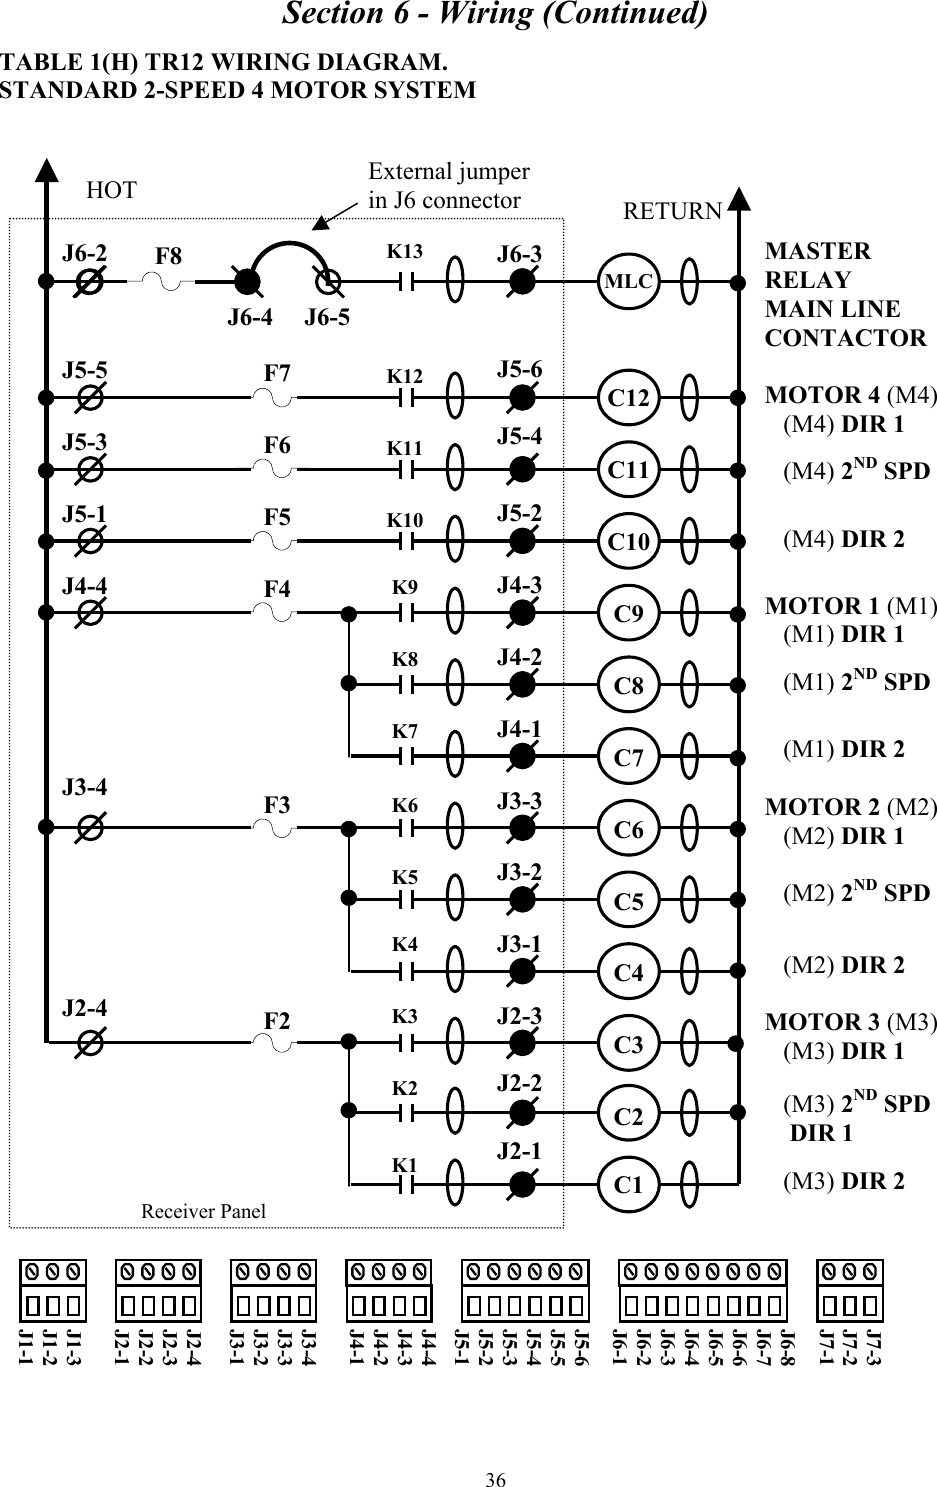 Section 6 - Wiring (Continued) 36  TABLE 1(H) TR12 WIRING DIAGRAM. STANDARD 2-SPEED 4 MOTOR SYSTEM   MASTER  RELAY MAIN LINE CONTACTOR  MOTOR 4 (M4)    (M4) DIR 1     (M4) 2ND SPD                    (M4) DIR 2     MOTOR 1 (M1)    (M1) DIR 1     (M1) 2ND SPD                     (M1) DIR 2  MOTOR 2 (M2)    (M2) DIR 1     (M2) 2ND SPD                     (M2) DIR 2  MOTOR 3 (M3)    (M3) DIR 1     (M3) 2ND SPD       DIR 1            (M3) DIR 2      Receiver Panel J6-2    J5-5  J5-3  J5-1  J4-4      J3-4        J2-4 J6-3    J5-6  J5-4   J5-2  J4-3  J4-2  J4-1  J3-3  J3-2  J3-1  J2-3  J2-2  J2-1 HOT  RETURN K13     K12   K11   K10   K9   K8   K7   K6   K5   K4   K3   K2   K1 MLC    C12  C11  C10  C9  C8  C7  C6  C5  C4  C3  C2  C1     F7  F6  F5  F4      F3        F2  J7-3 J7-2 J7-1  J6-8 J6-7 J6-6 J6-5 J6-4 J6-3 J6-2 J6-1   J5-6 J5-5 J5-4 J5-3 J5-2 J5-1  J4-4 J4-3 J4-2 J4-1  J3-4 J3-3 J3-2 J3-1  J2-4 J2-3 J2-2 J2-1  J1-3 J1-2 J1-1 External jumper in J6 connector J6-4     J6-5 F8 